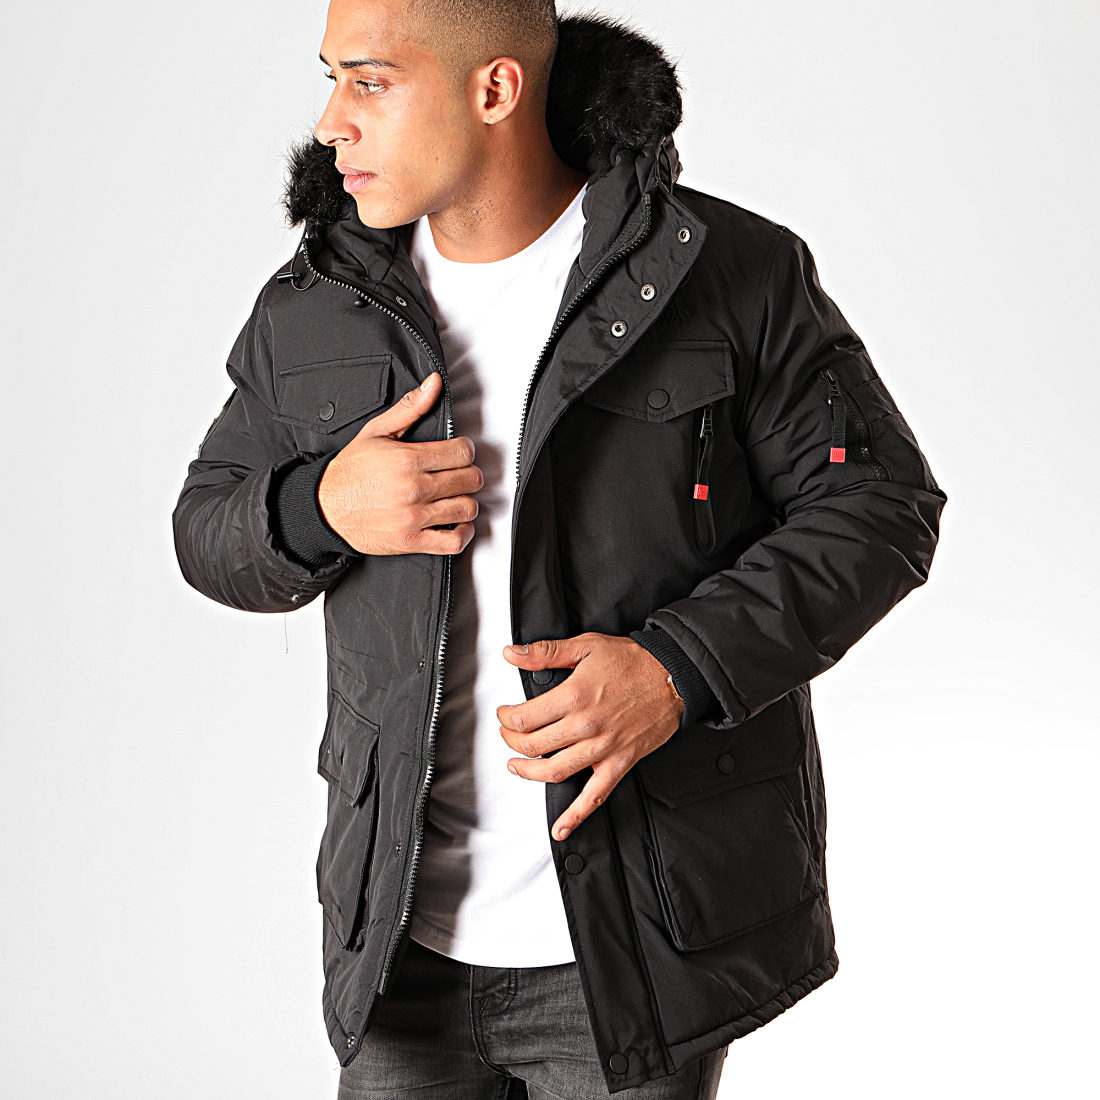 geographical norway parka